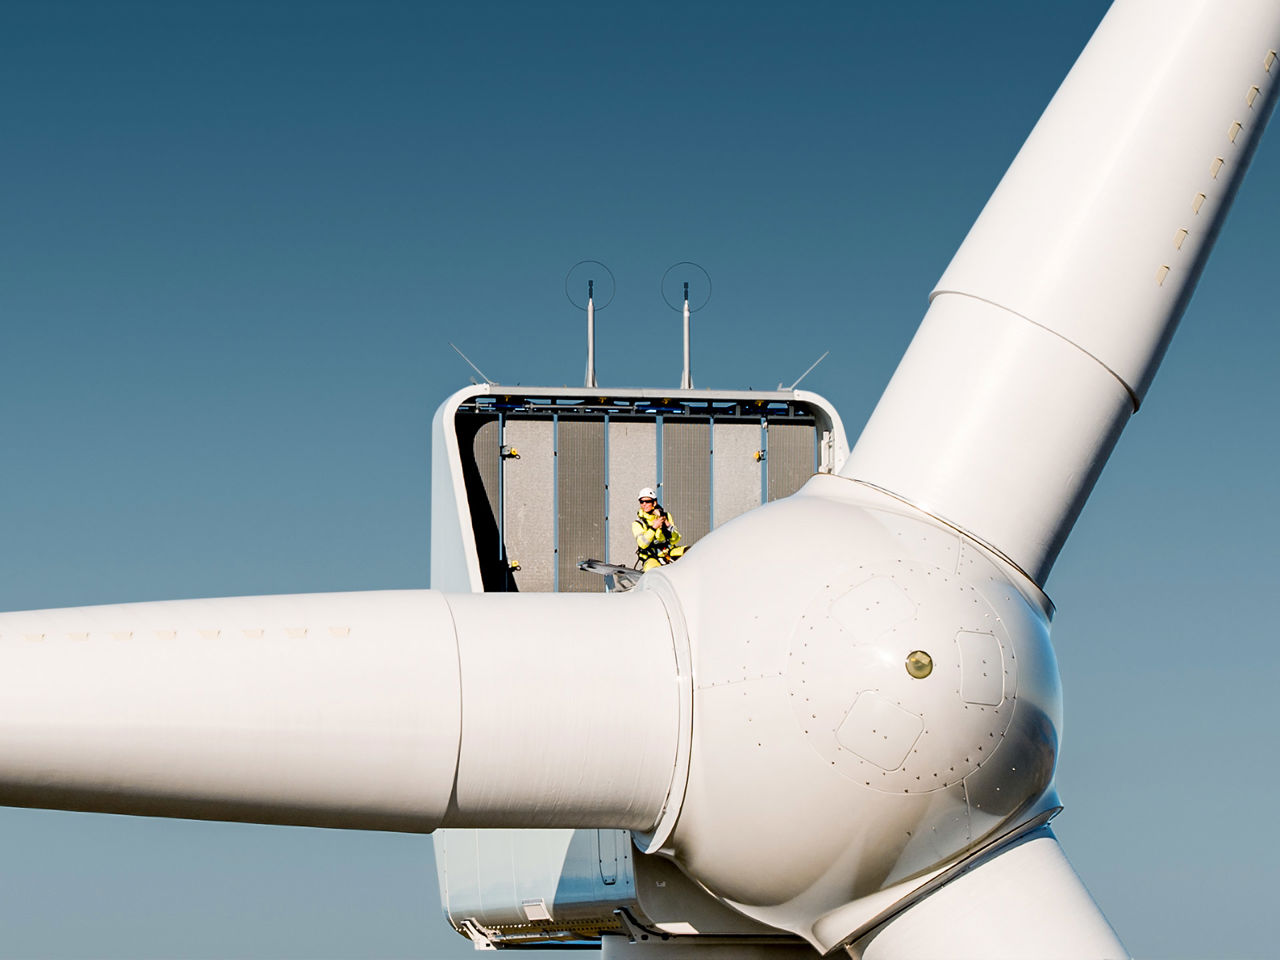 Top of a wind turbine with a Statkraft employee in the top for inspections